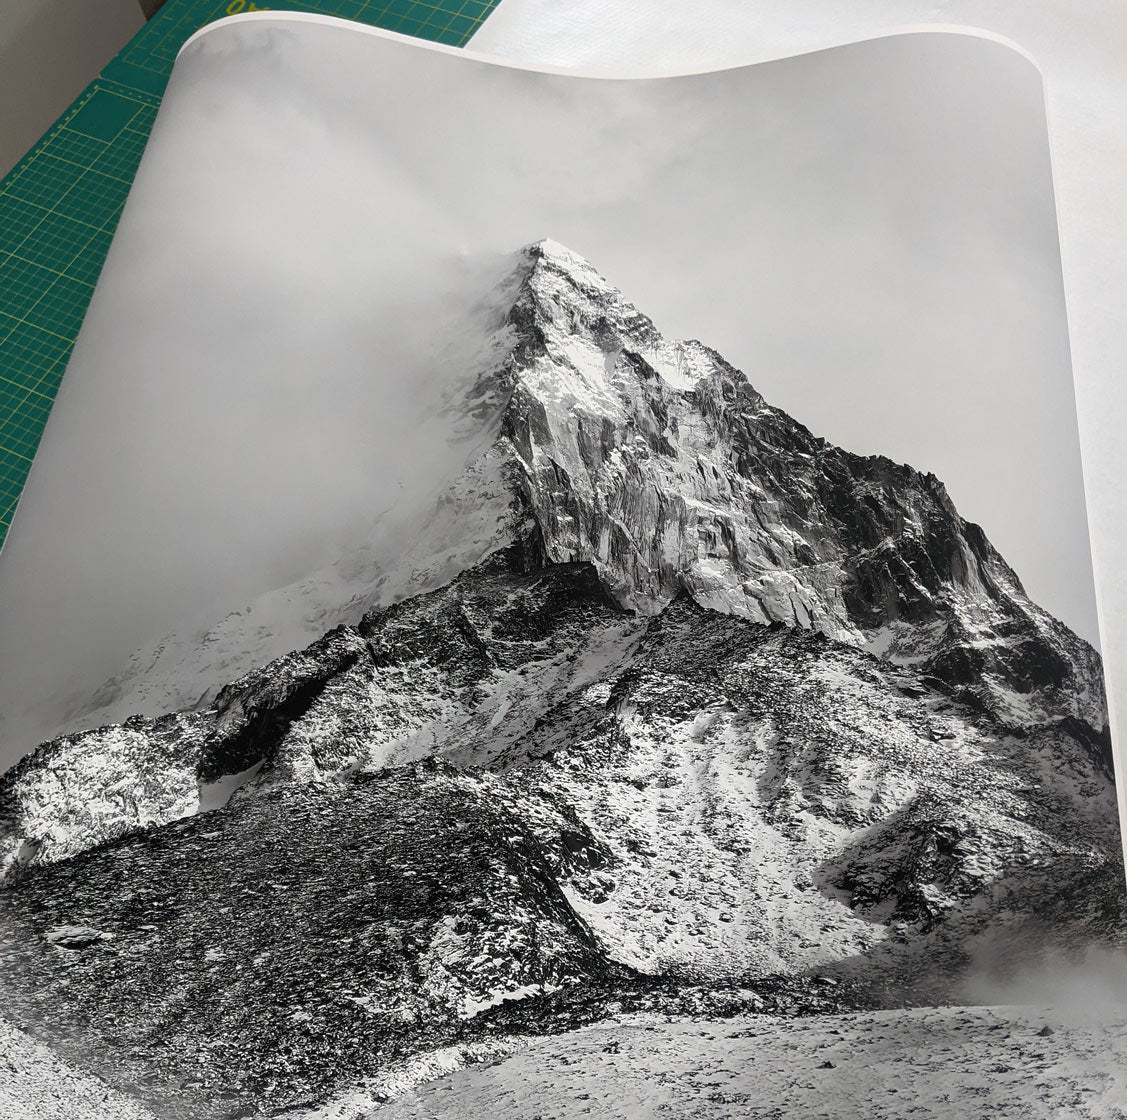 A black and white photo of a mountain printed on matte paper